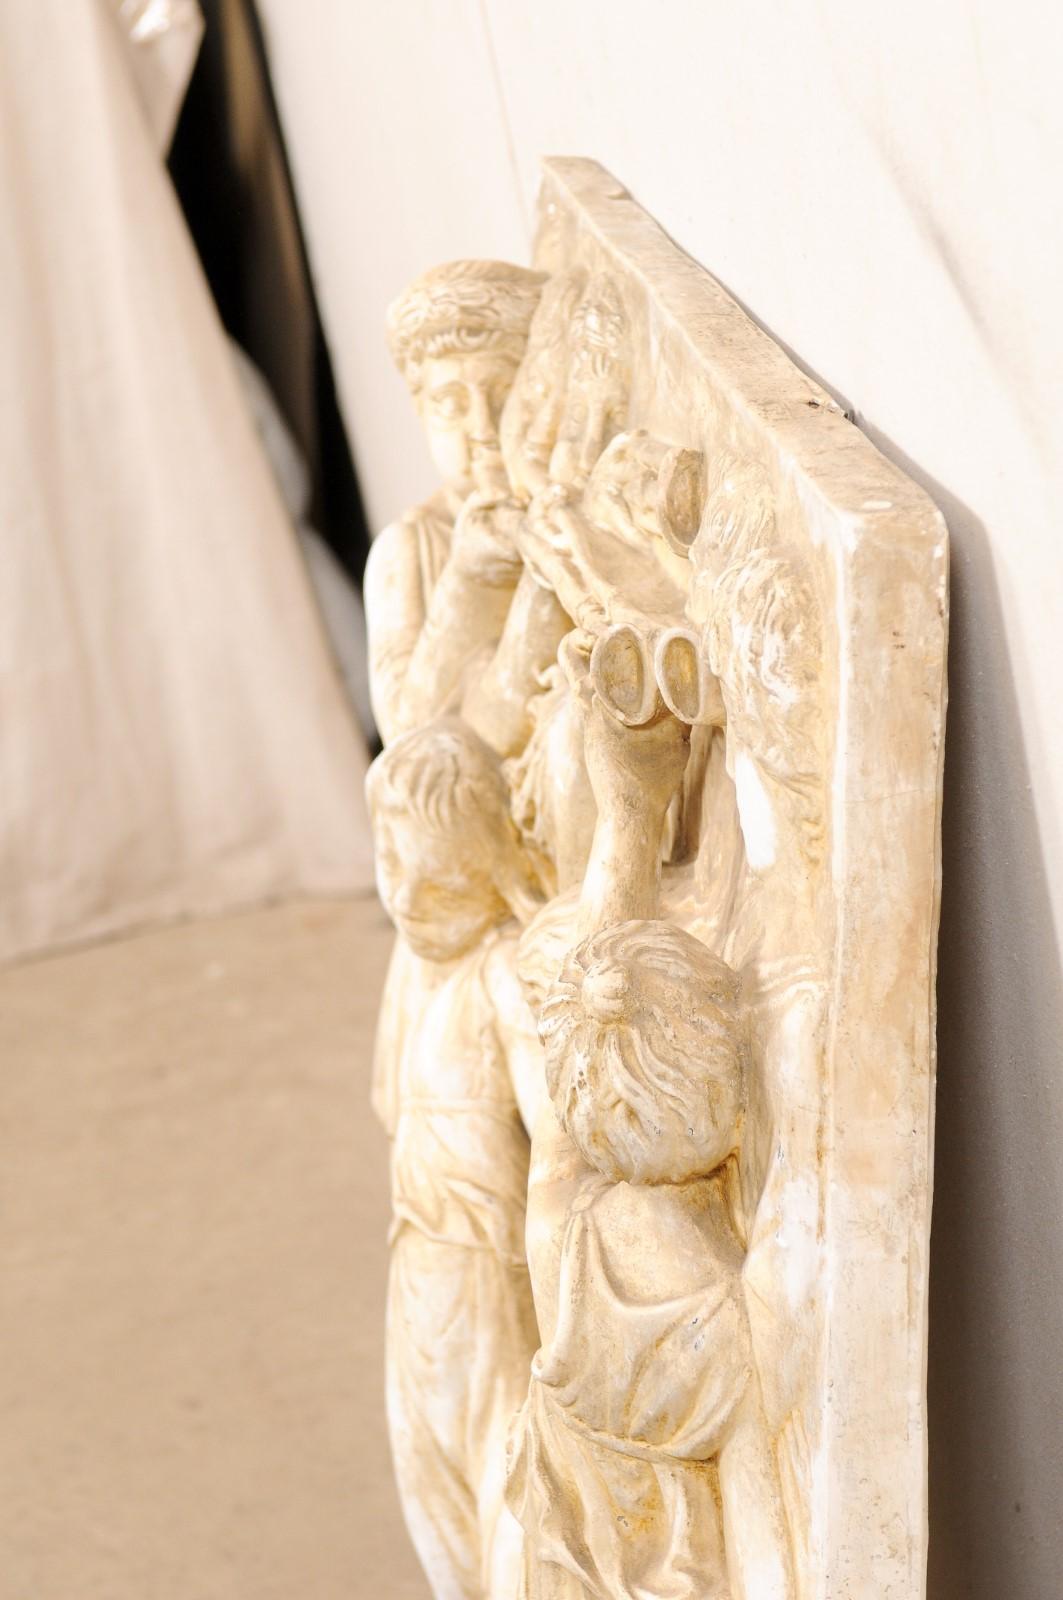 Italian Plaster Relief in Roman Figure Motif from the Mid-20th Century For Sale 6